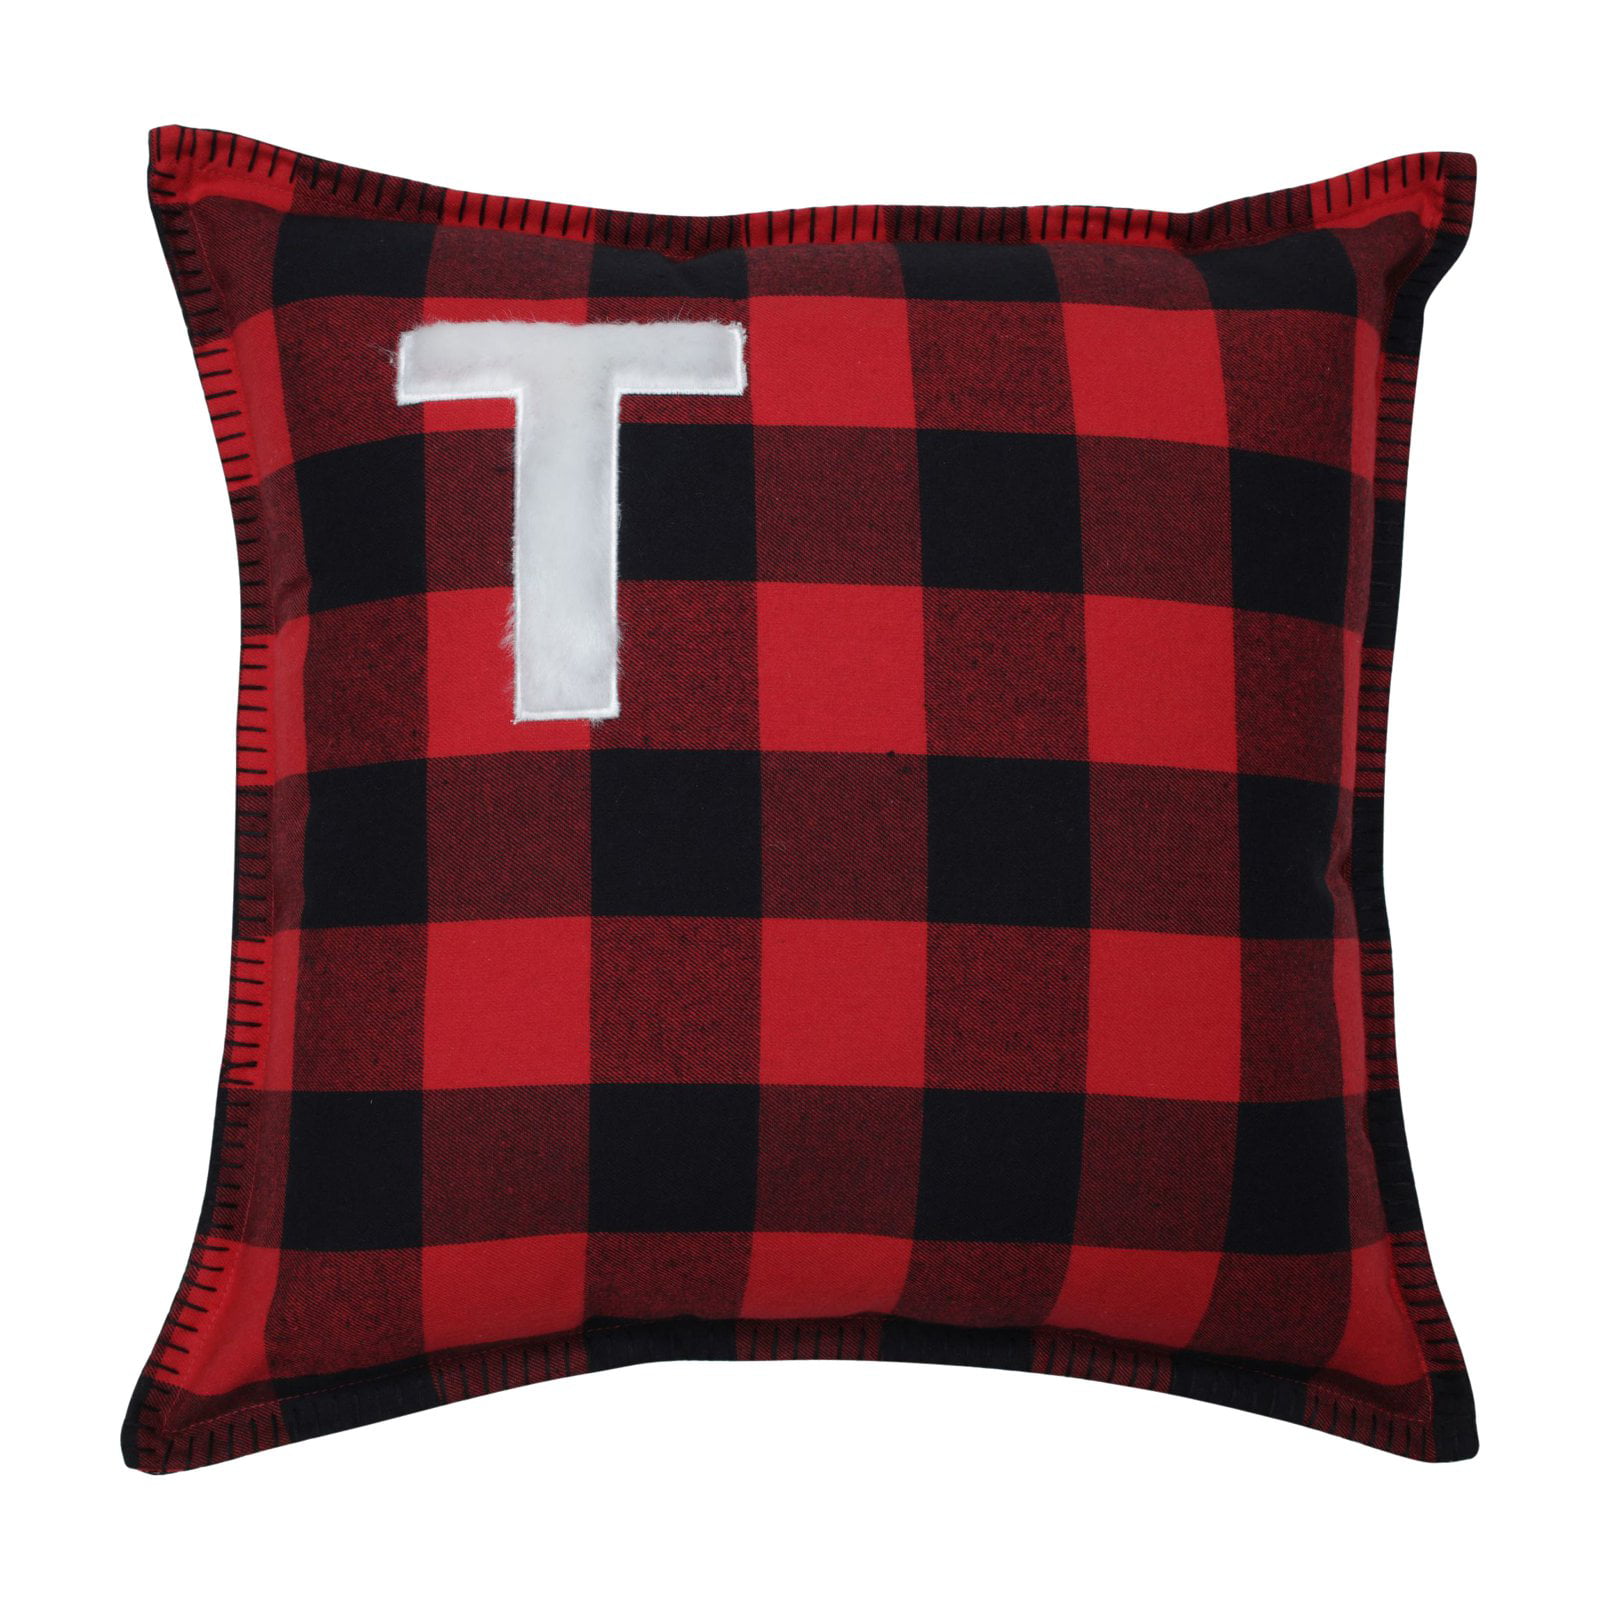 Pillow Perfect Buffalo Plaid Lettered 17 in. Throw Pillow - Walmart.com ...